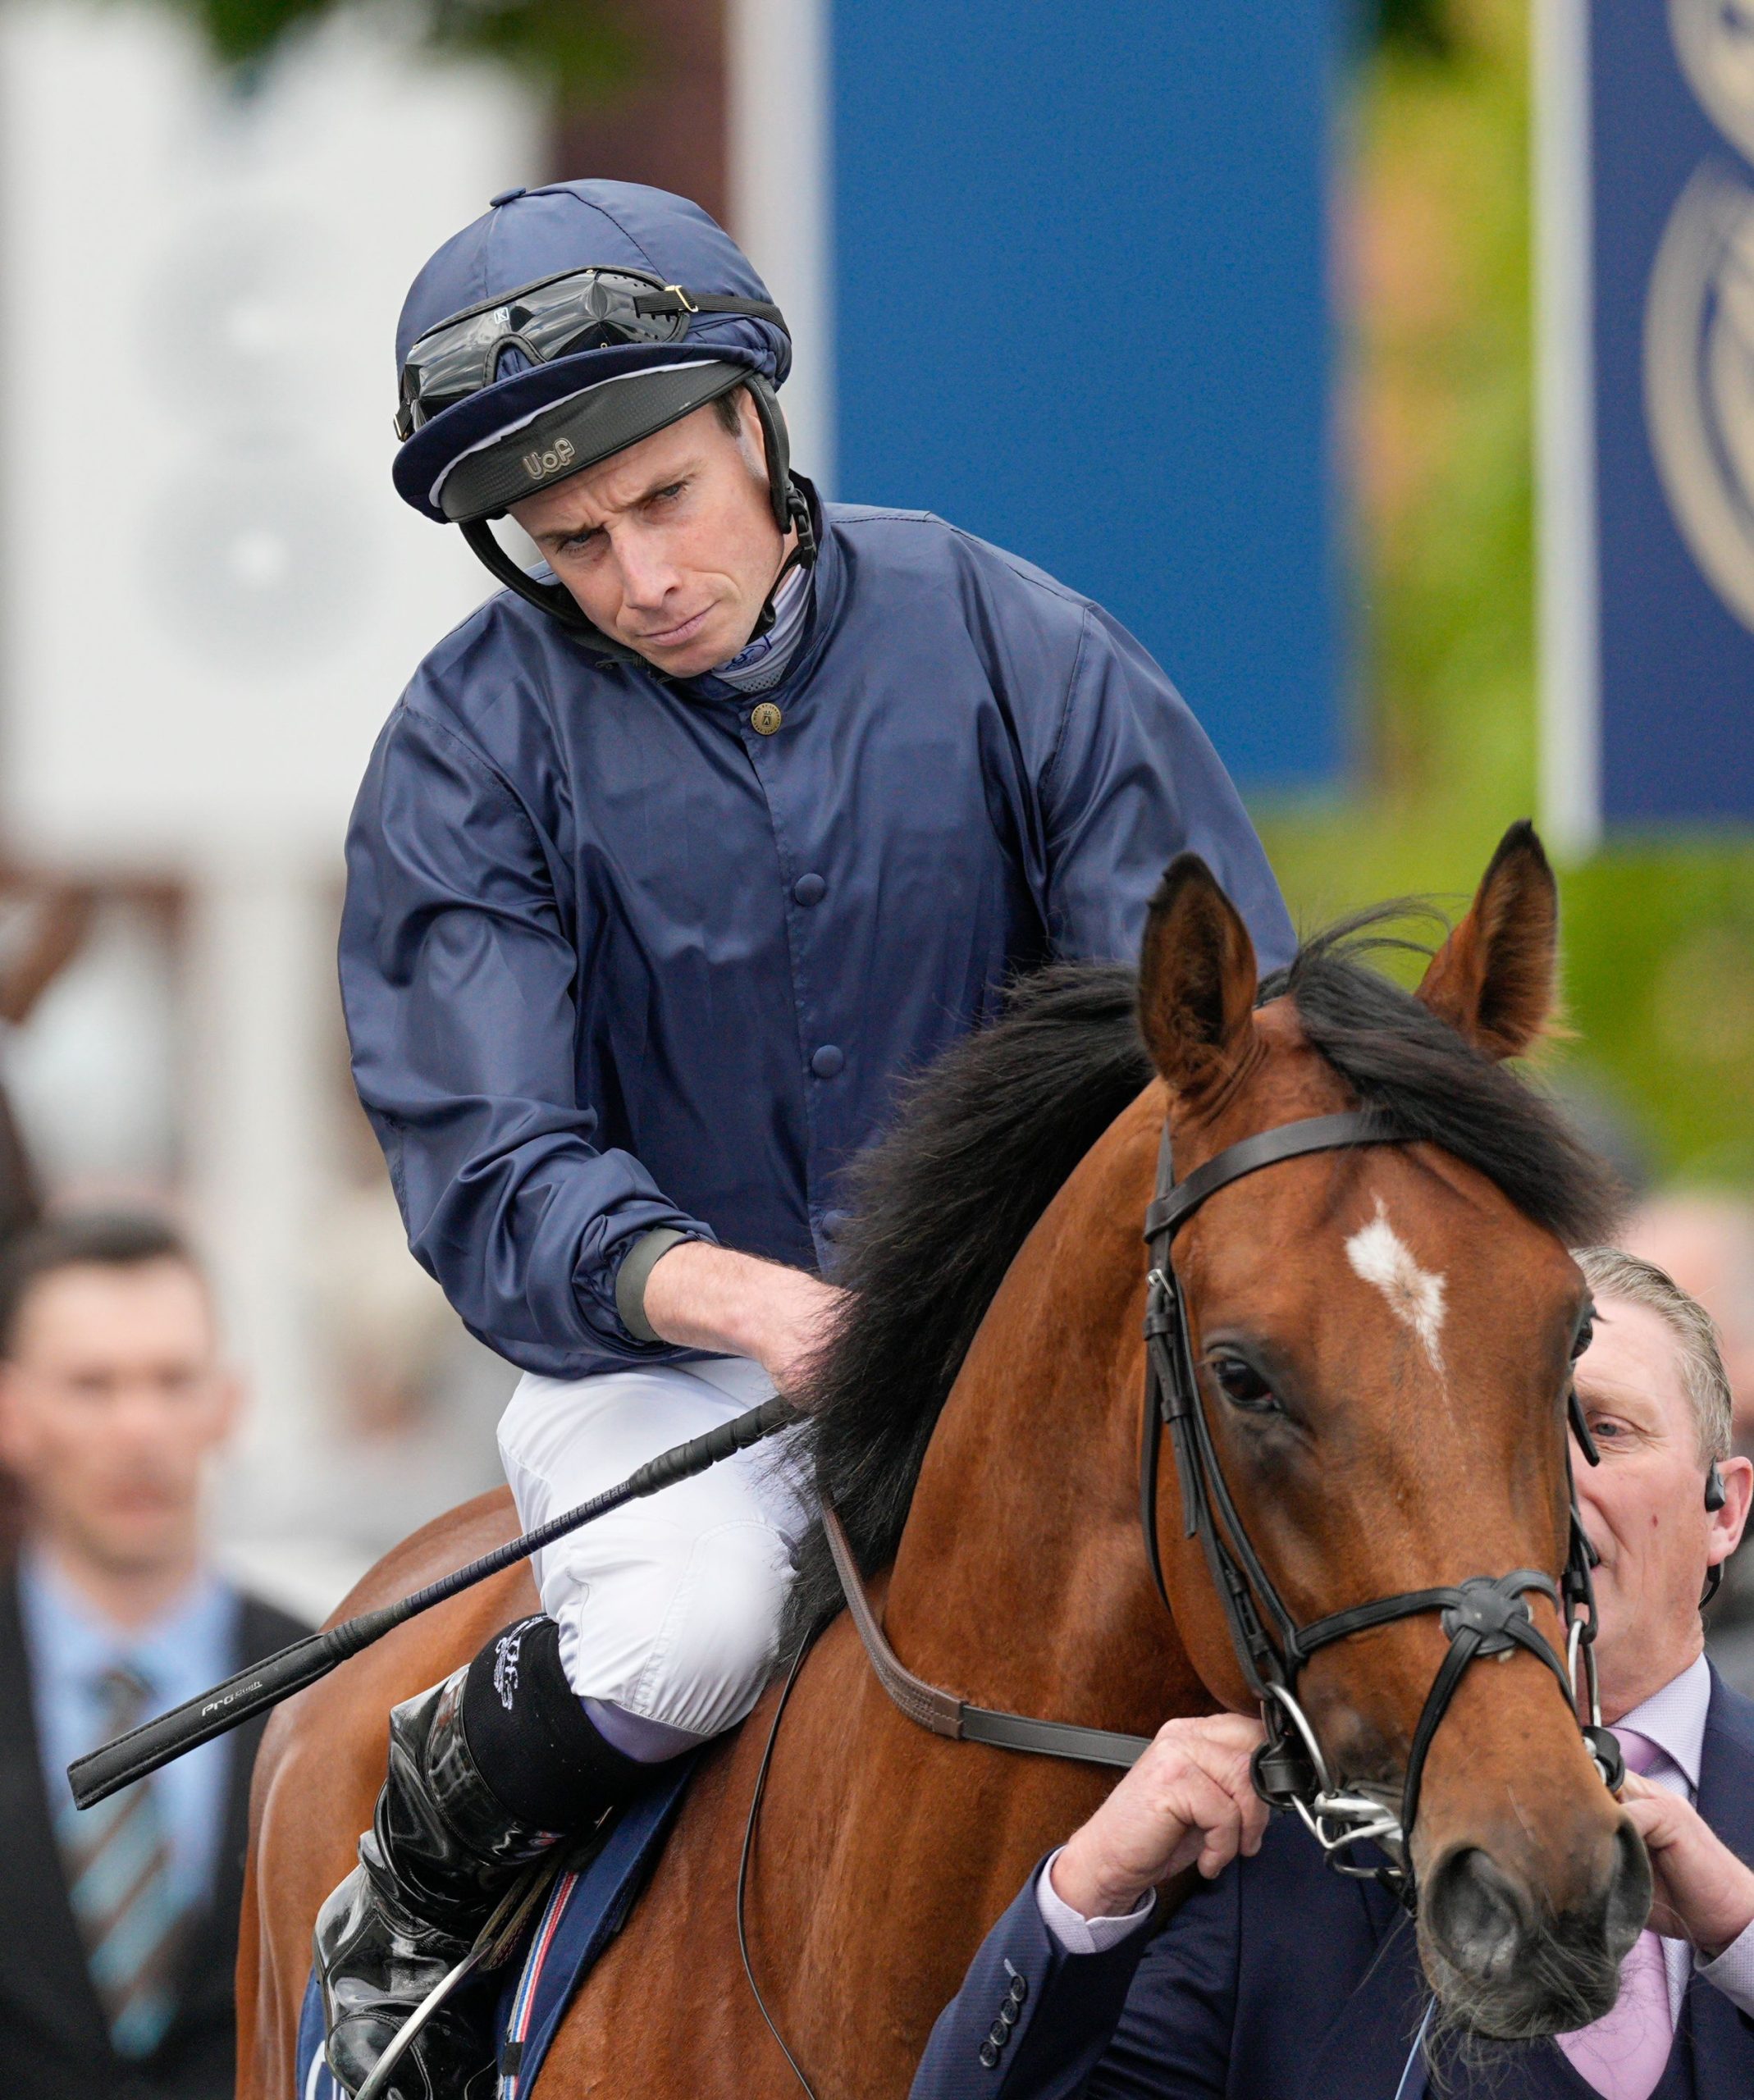 City of Troy, an odds-on favourite, ended up finishing a distant ninth in the 2,000 Guineas